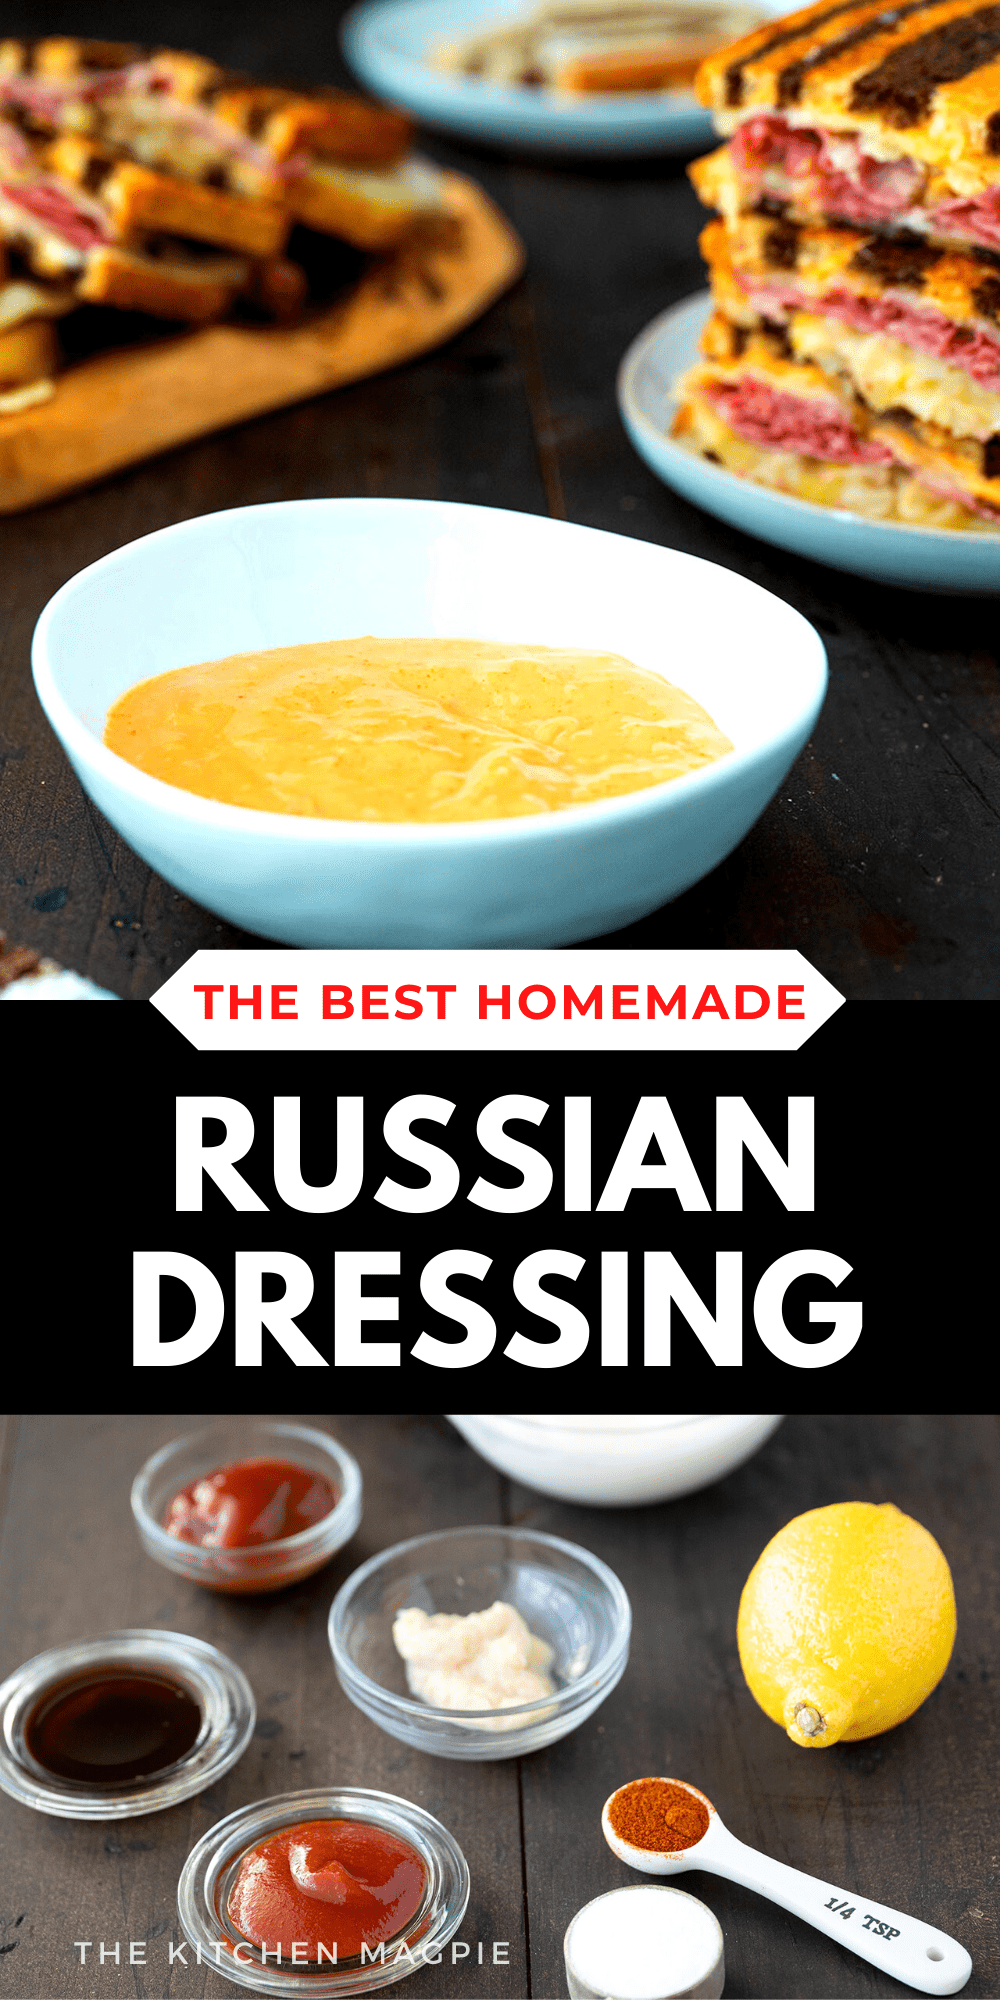 The sweet-spicy flavors of a good homemade Russian dressing are worth making yourself, as you probably won’t be able to find it elsewhere!